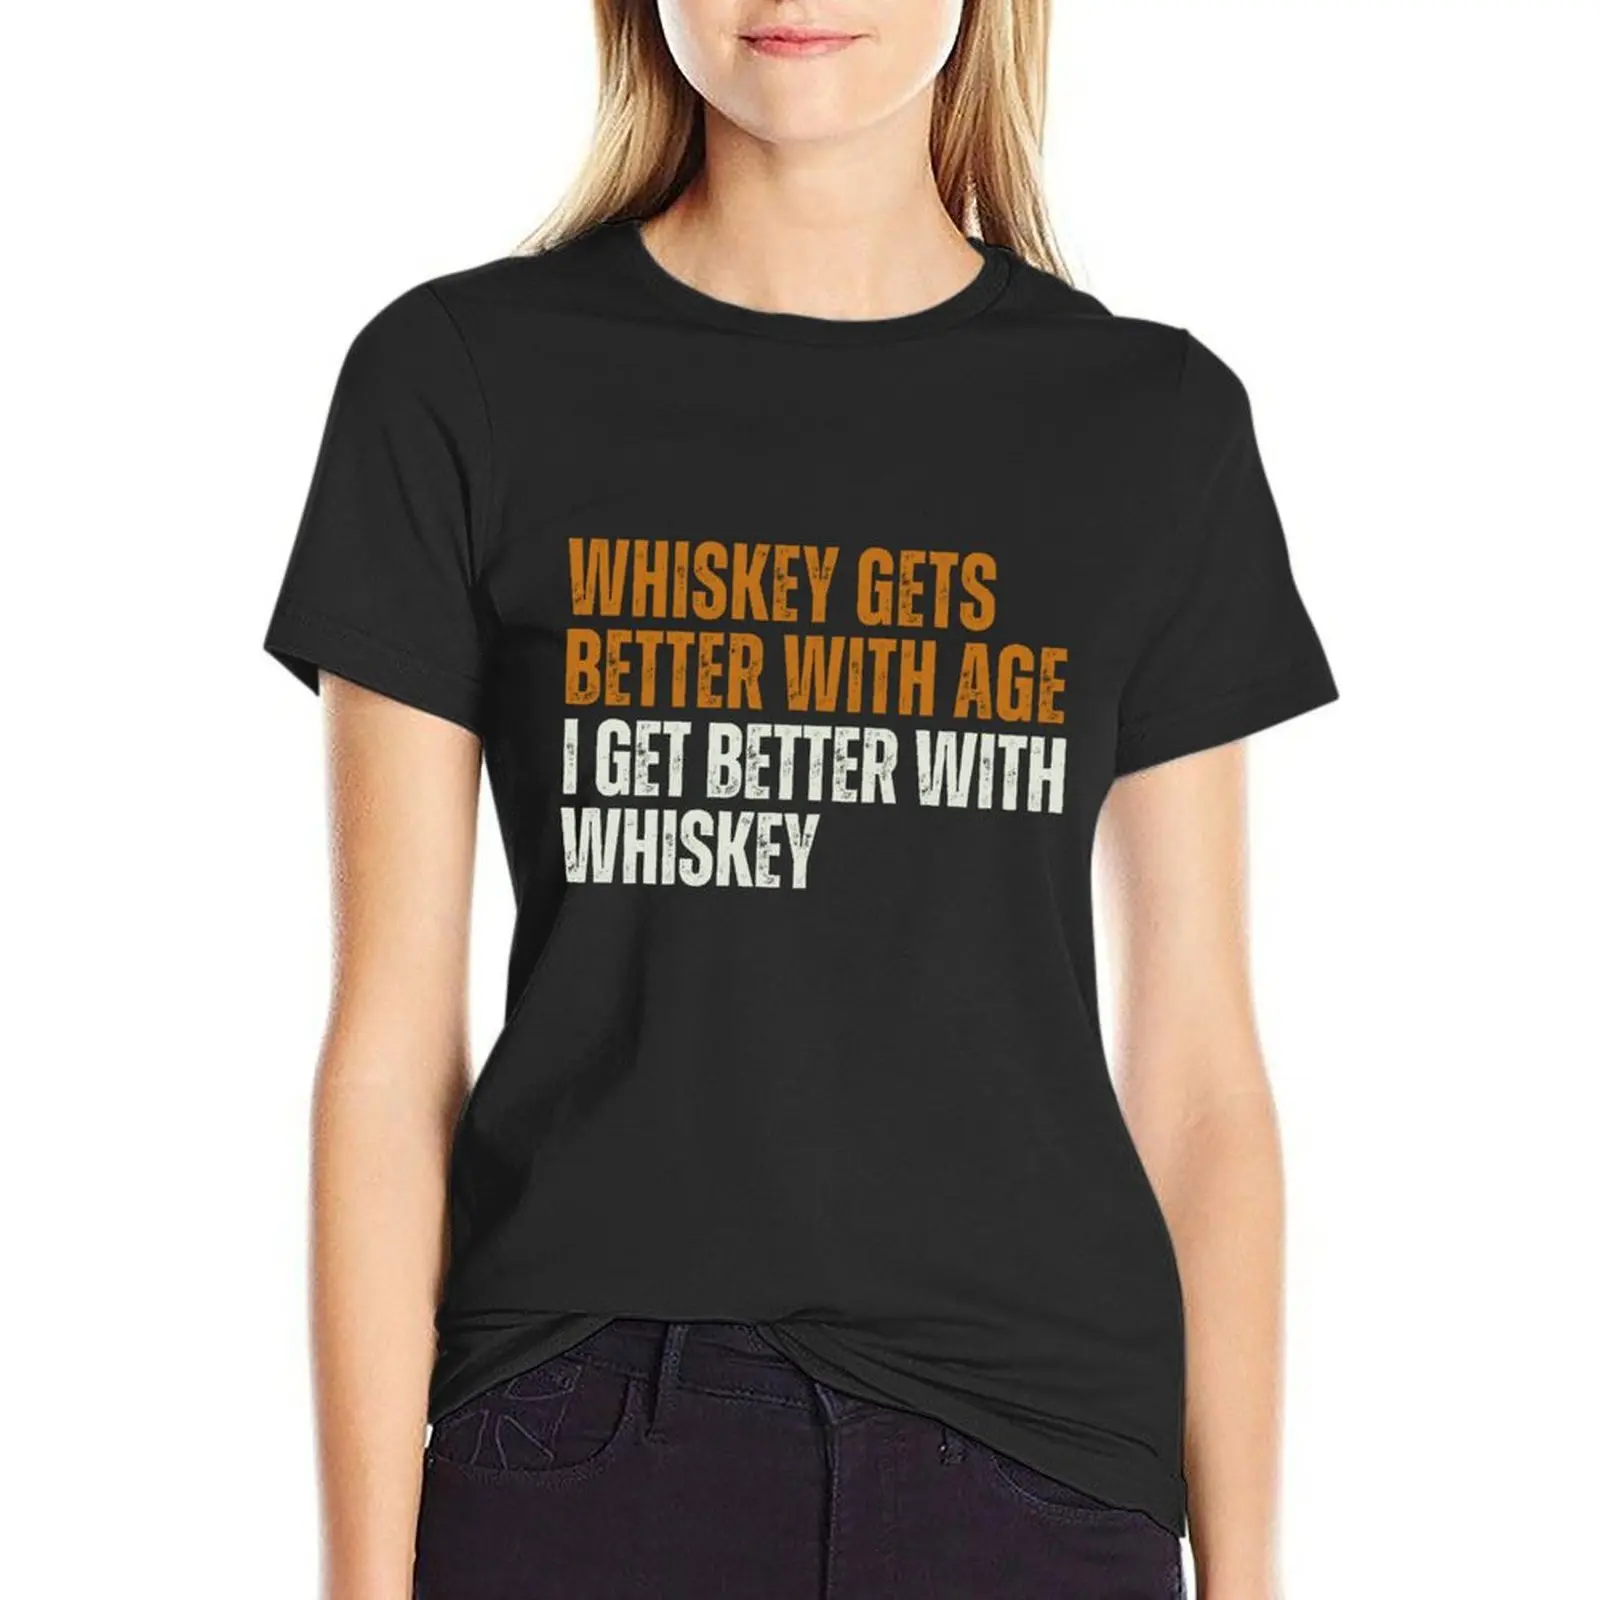 

I Get Better With Whiskey T-shirt hippie clothes cute tops lady clothes oversized t shirts for Women